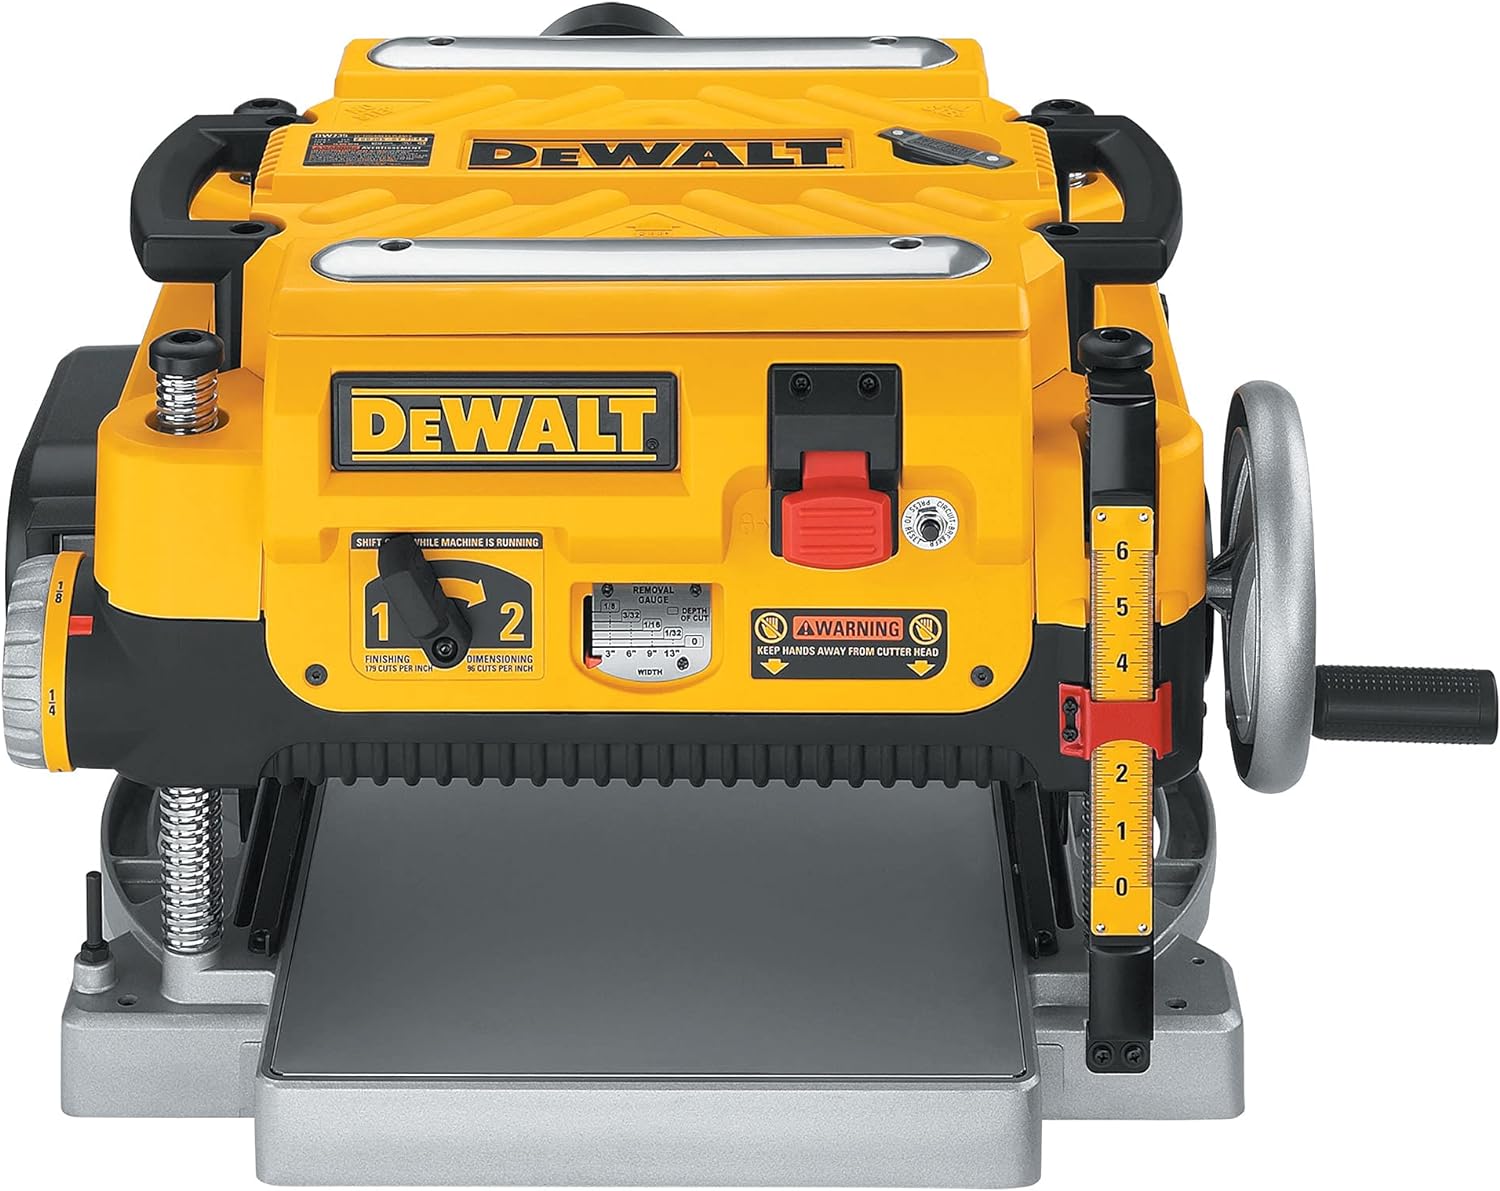 DEWALT Planer, Thickness Planer, 13-Inch, 3 Knife for Larger Cuts, Two Speed 20,000 RPM Motor, Corded (DW735) - $508.14